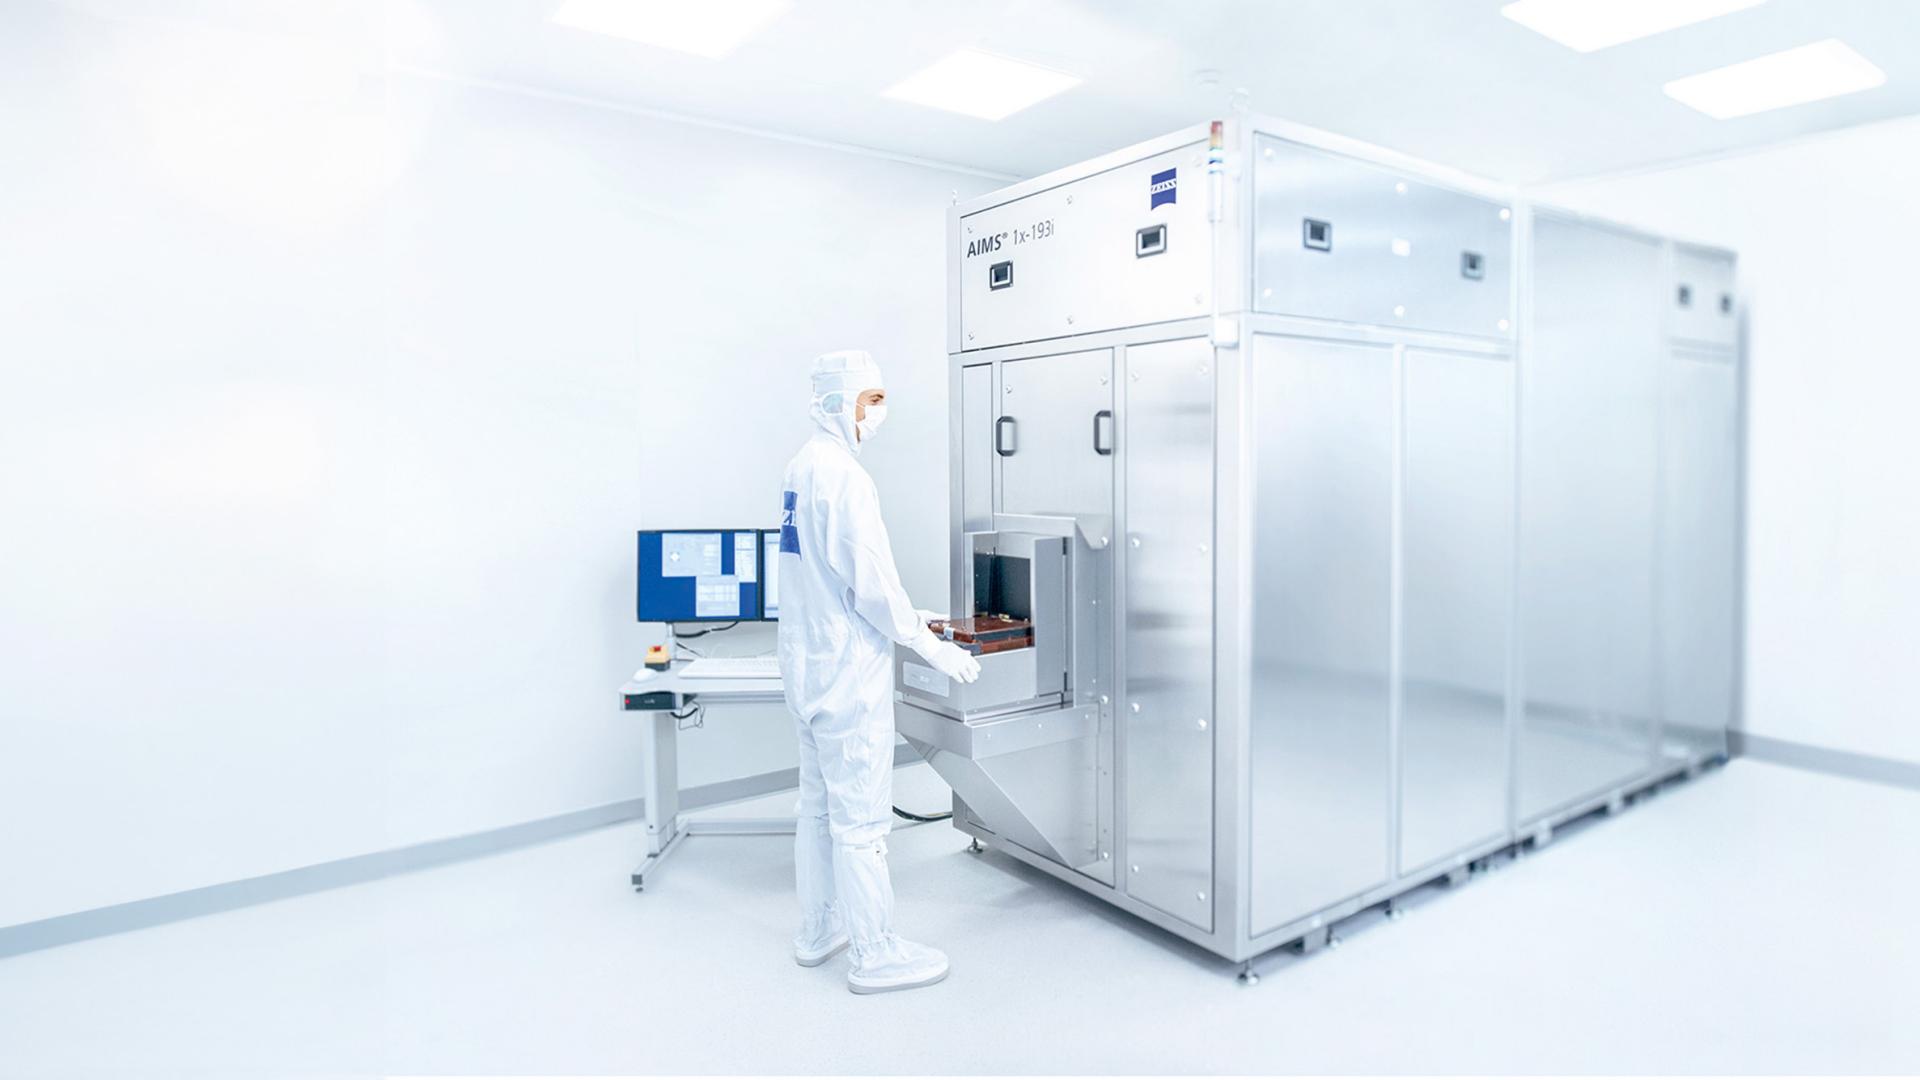 An employee works in the clean room on the AIMS® EUV system from ZEISS SMT 